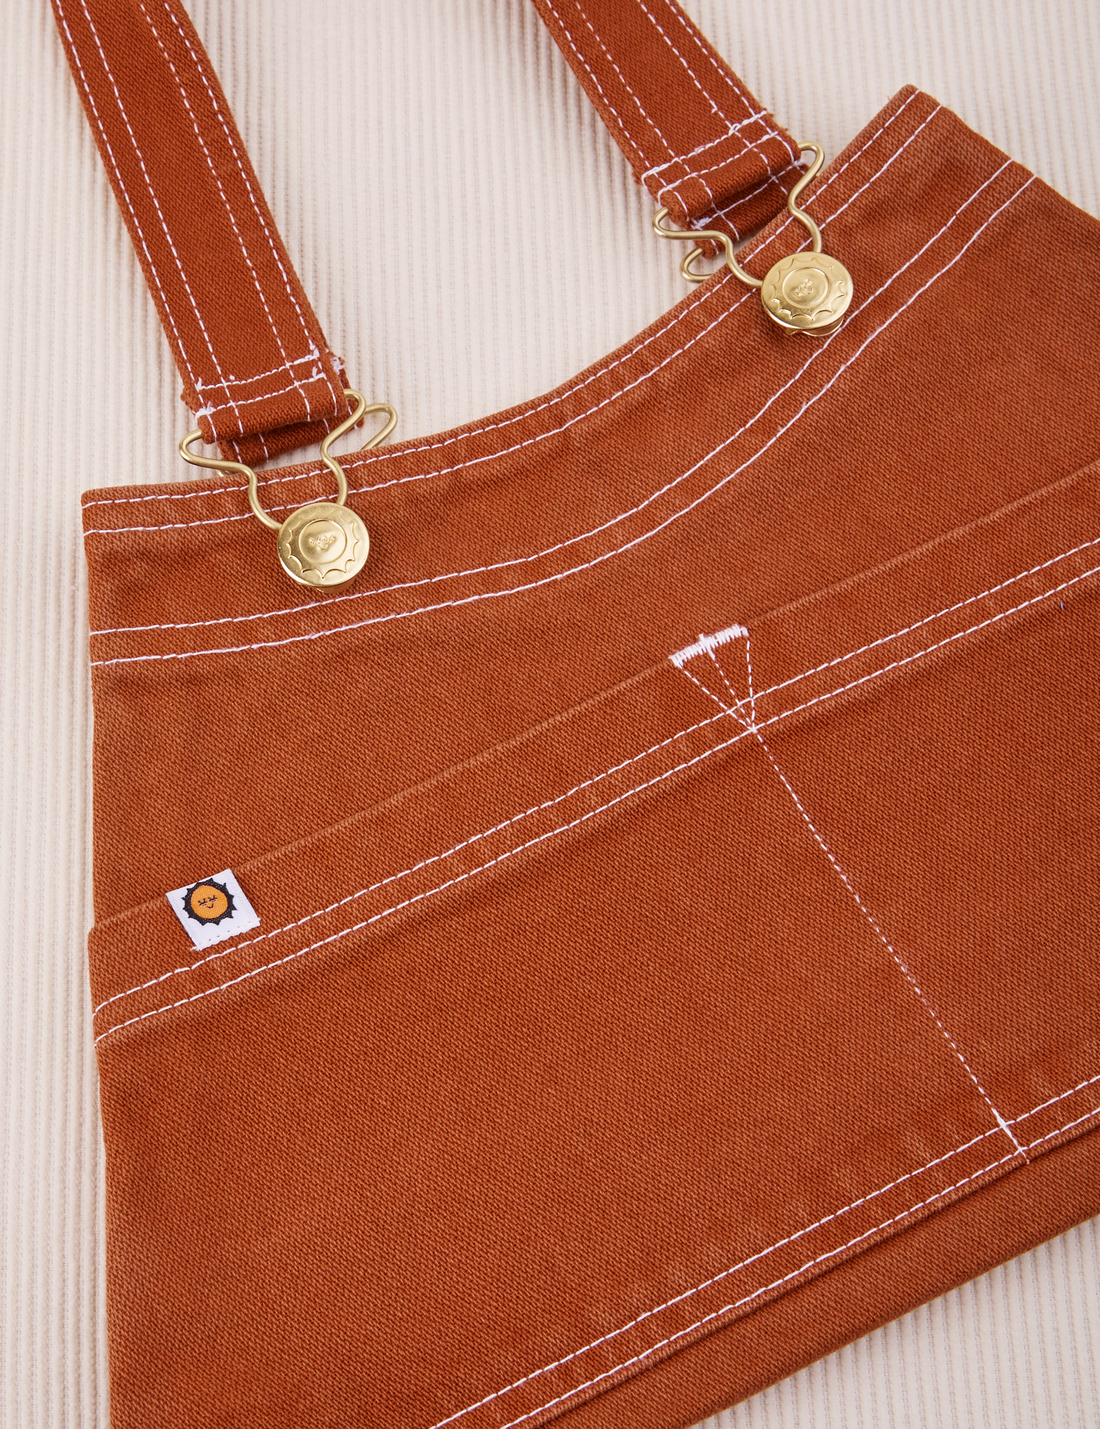 Overall Handbag in Burnt Terracotta. Contrast white stitching. Brass sun baby buttons and hardware